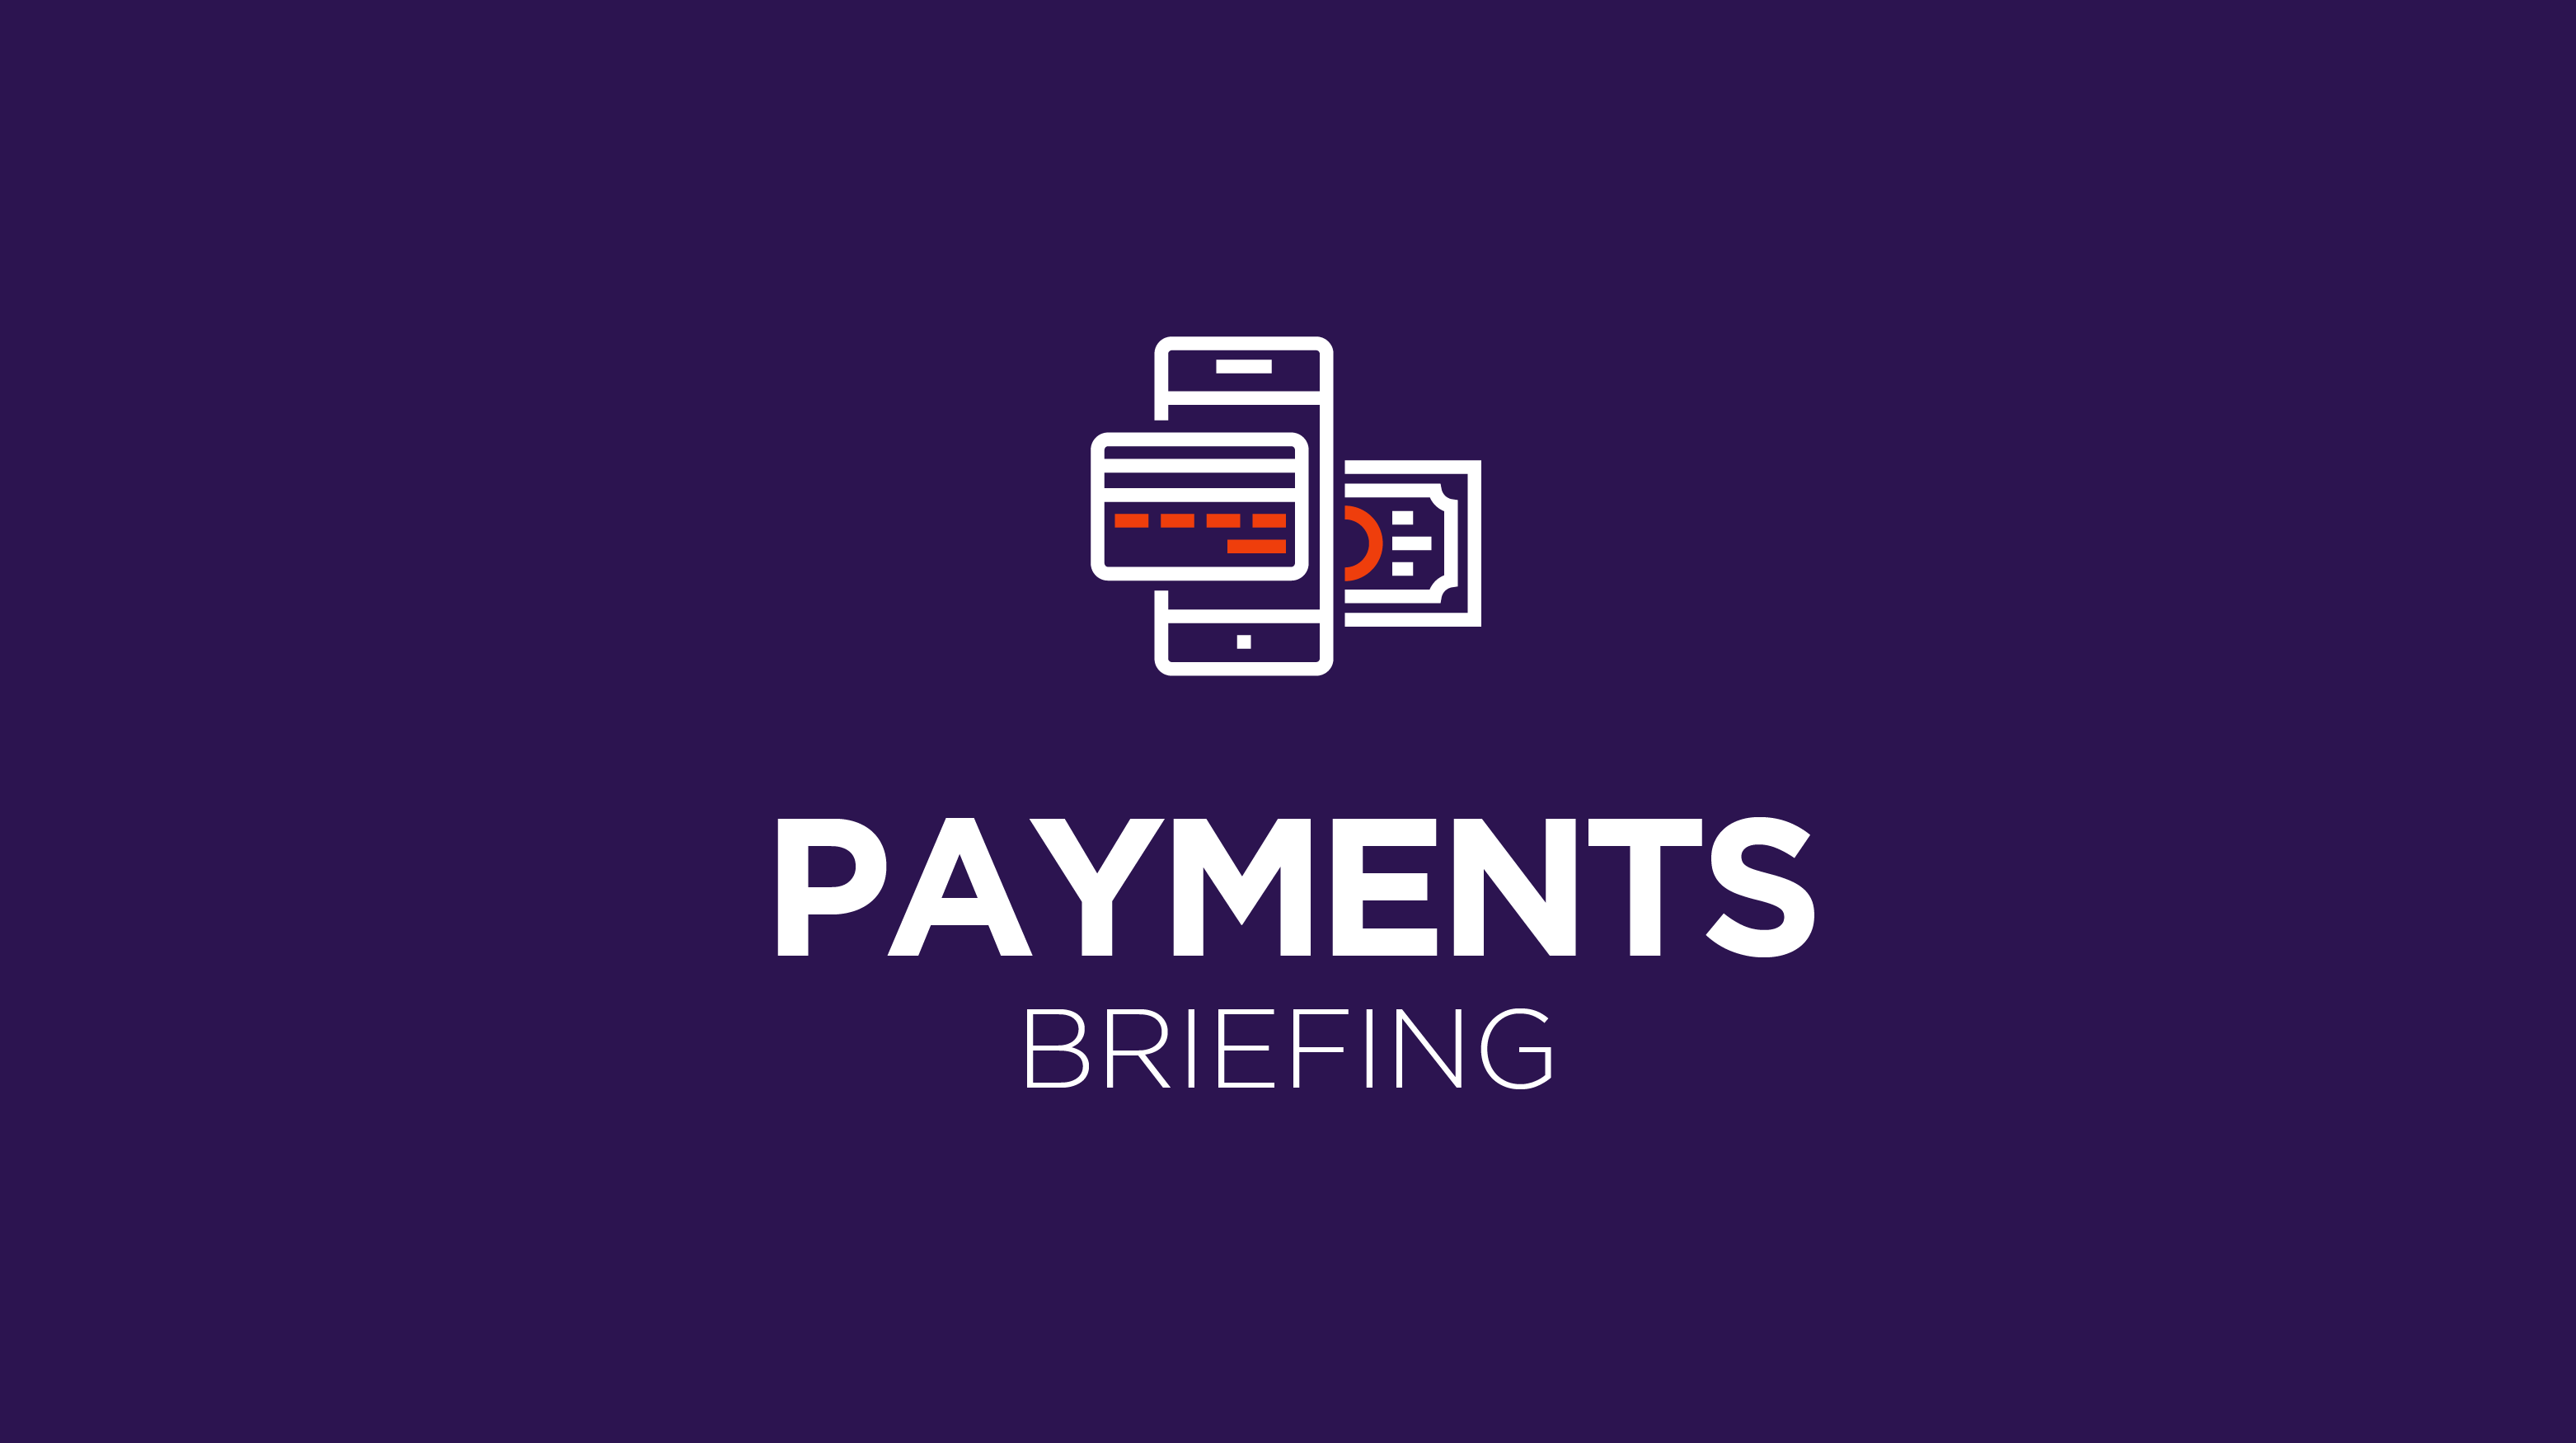 Payments Briefing: Behind Adyen’s H2 2021 earnings